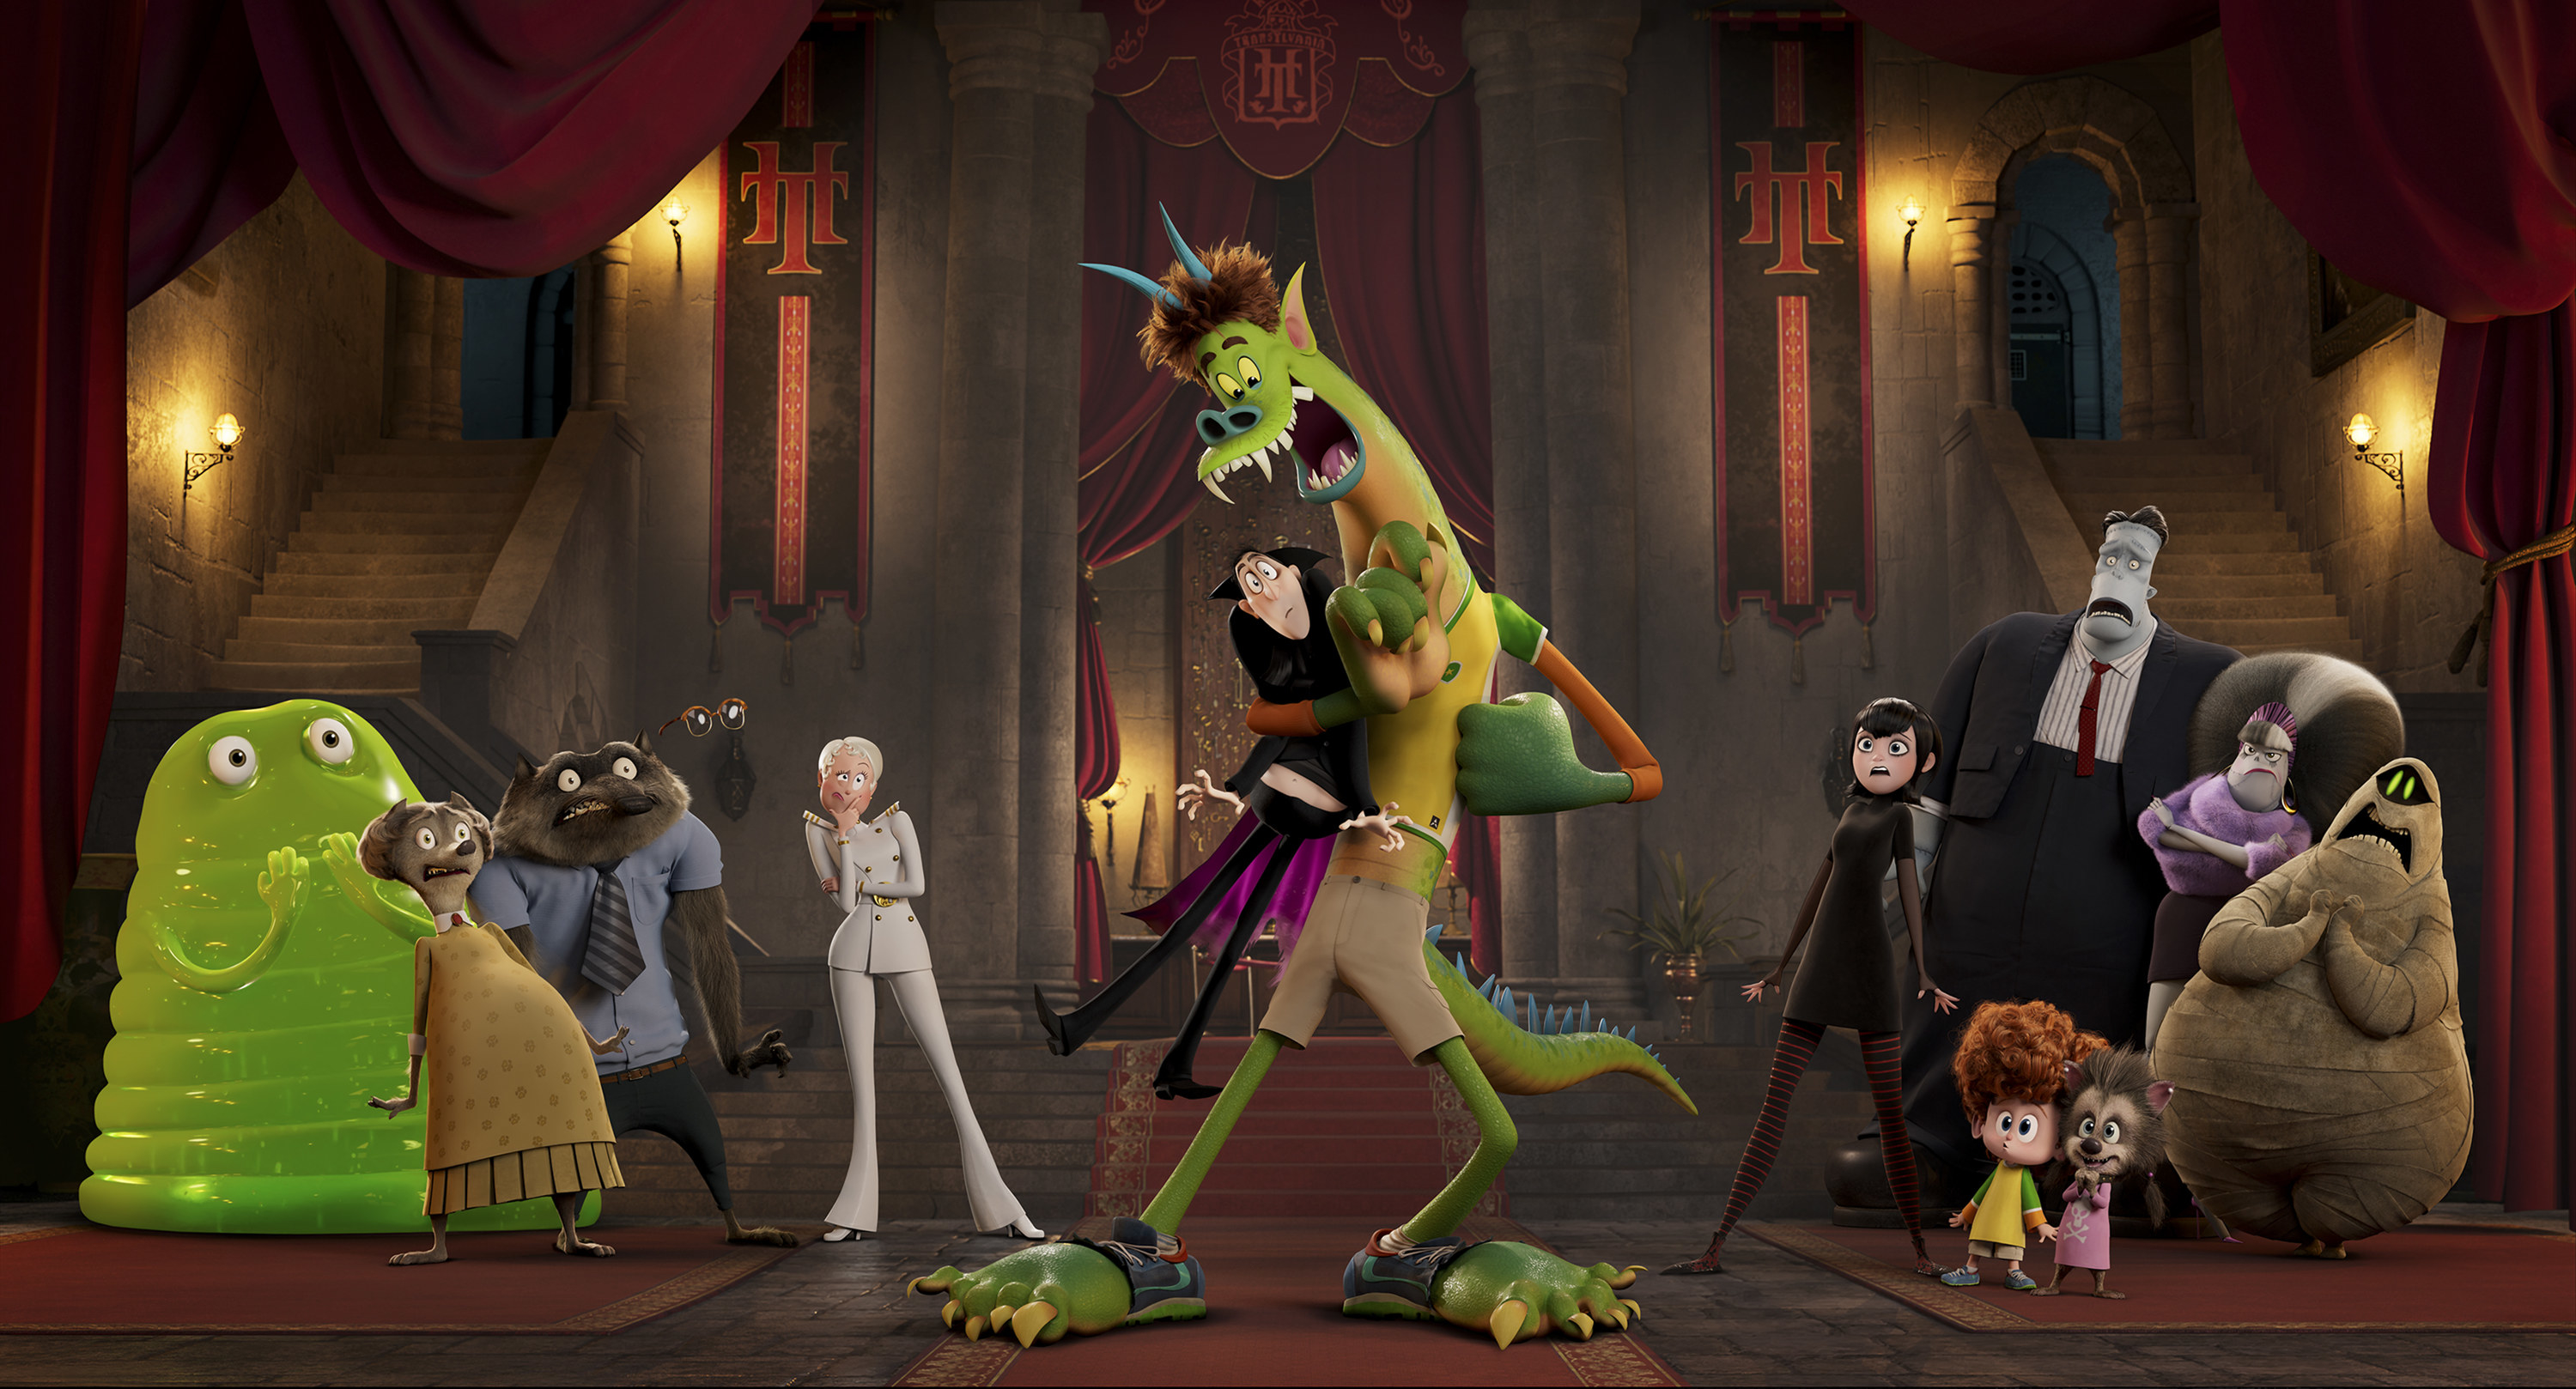 The Monsters of Hotel Transylvania huddle together